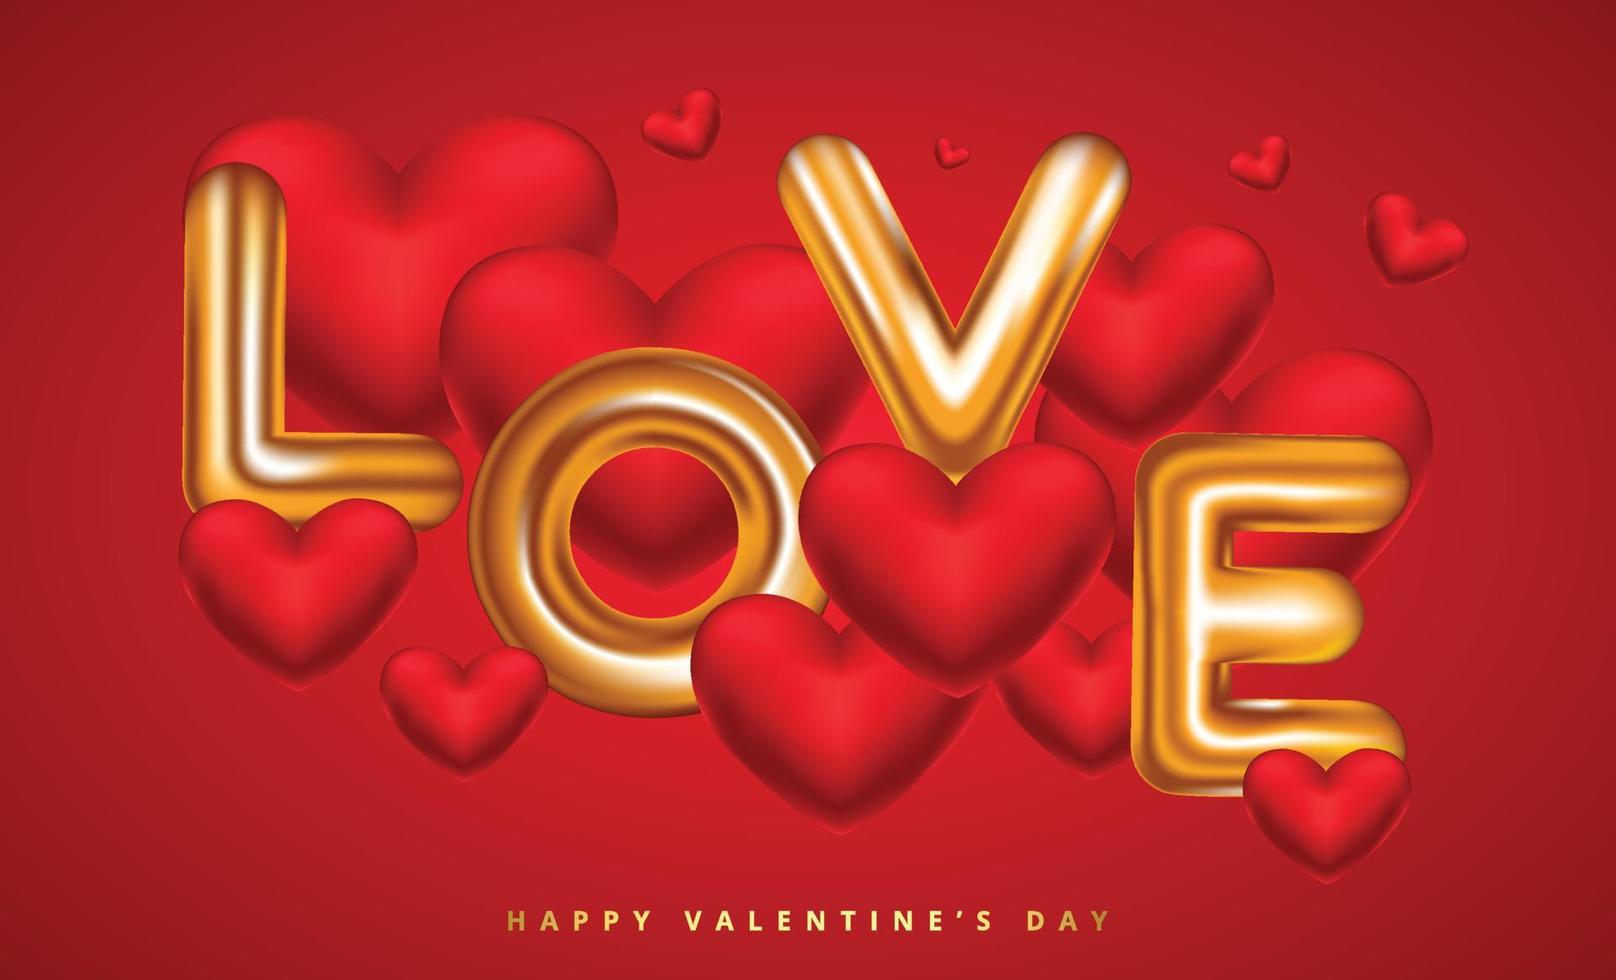 Realistic 3d gold lettering love with heart shape for valentines day vector